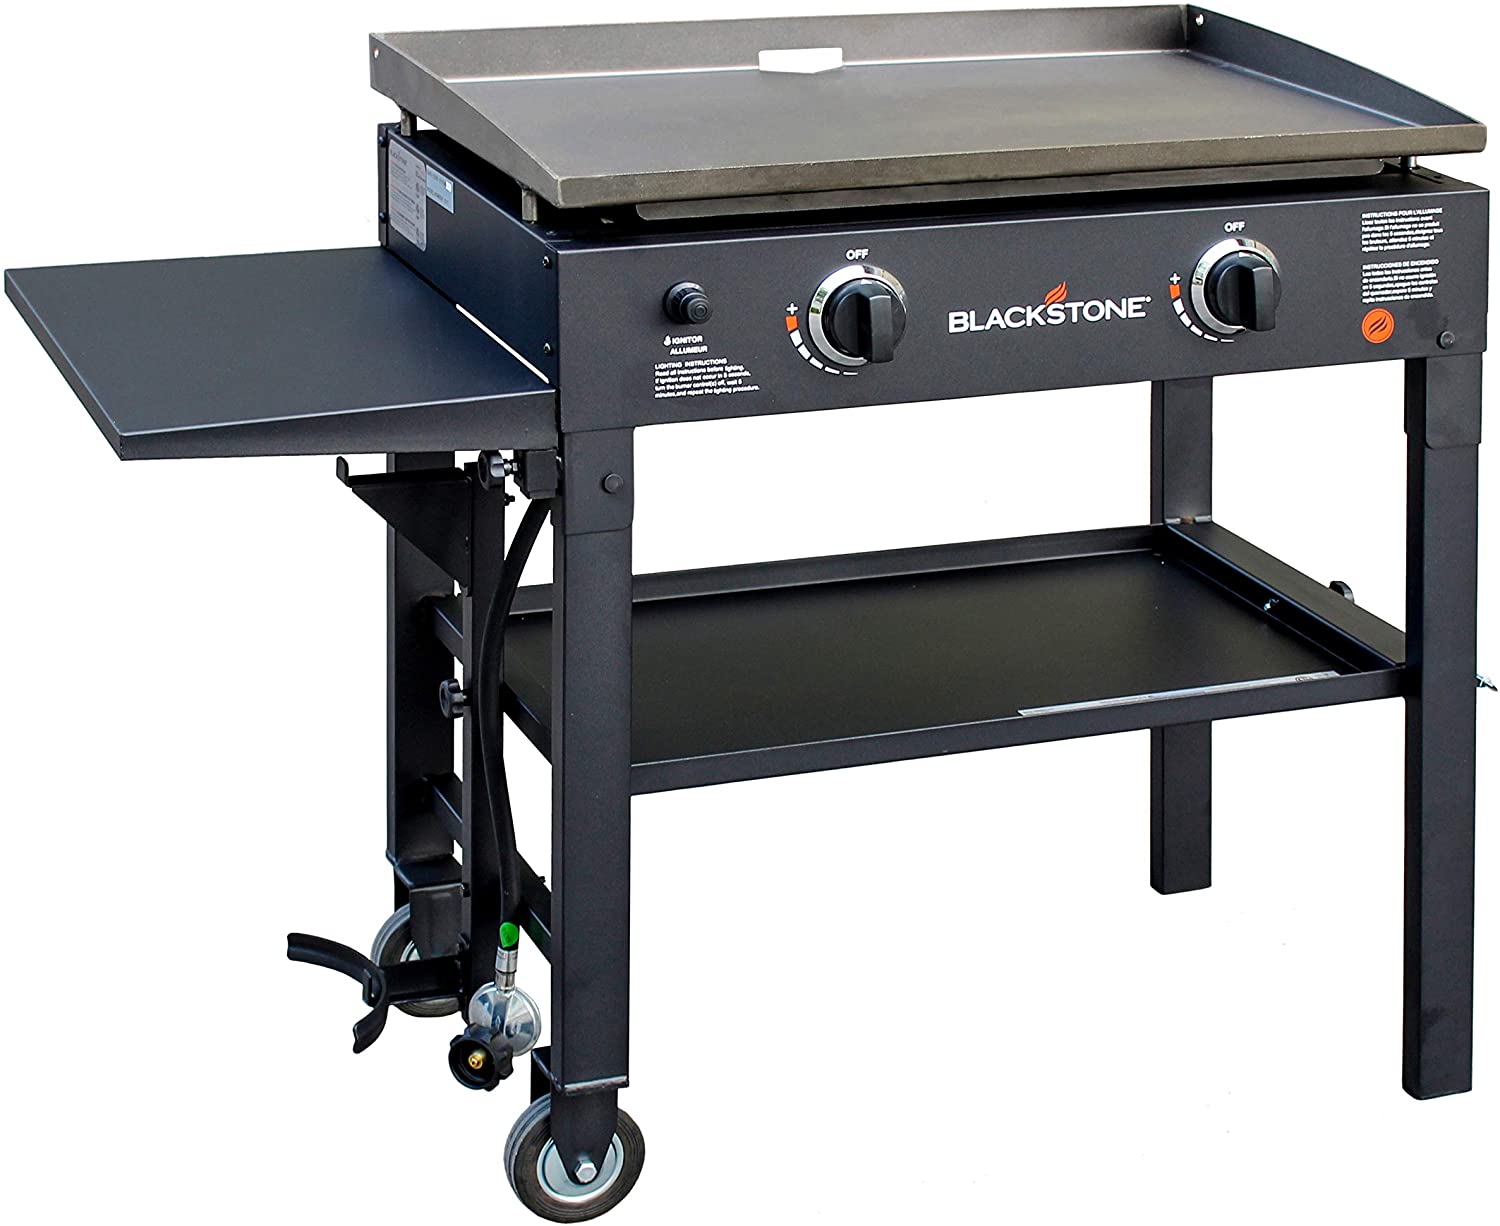 Blackstone Restaurant Style Flat Top Gas Griddle Station, 28-Inch